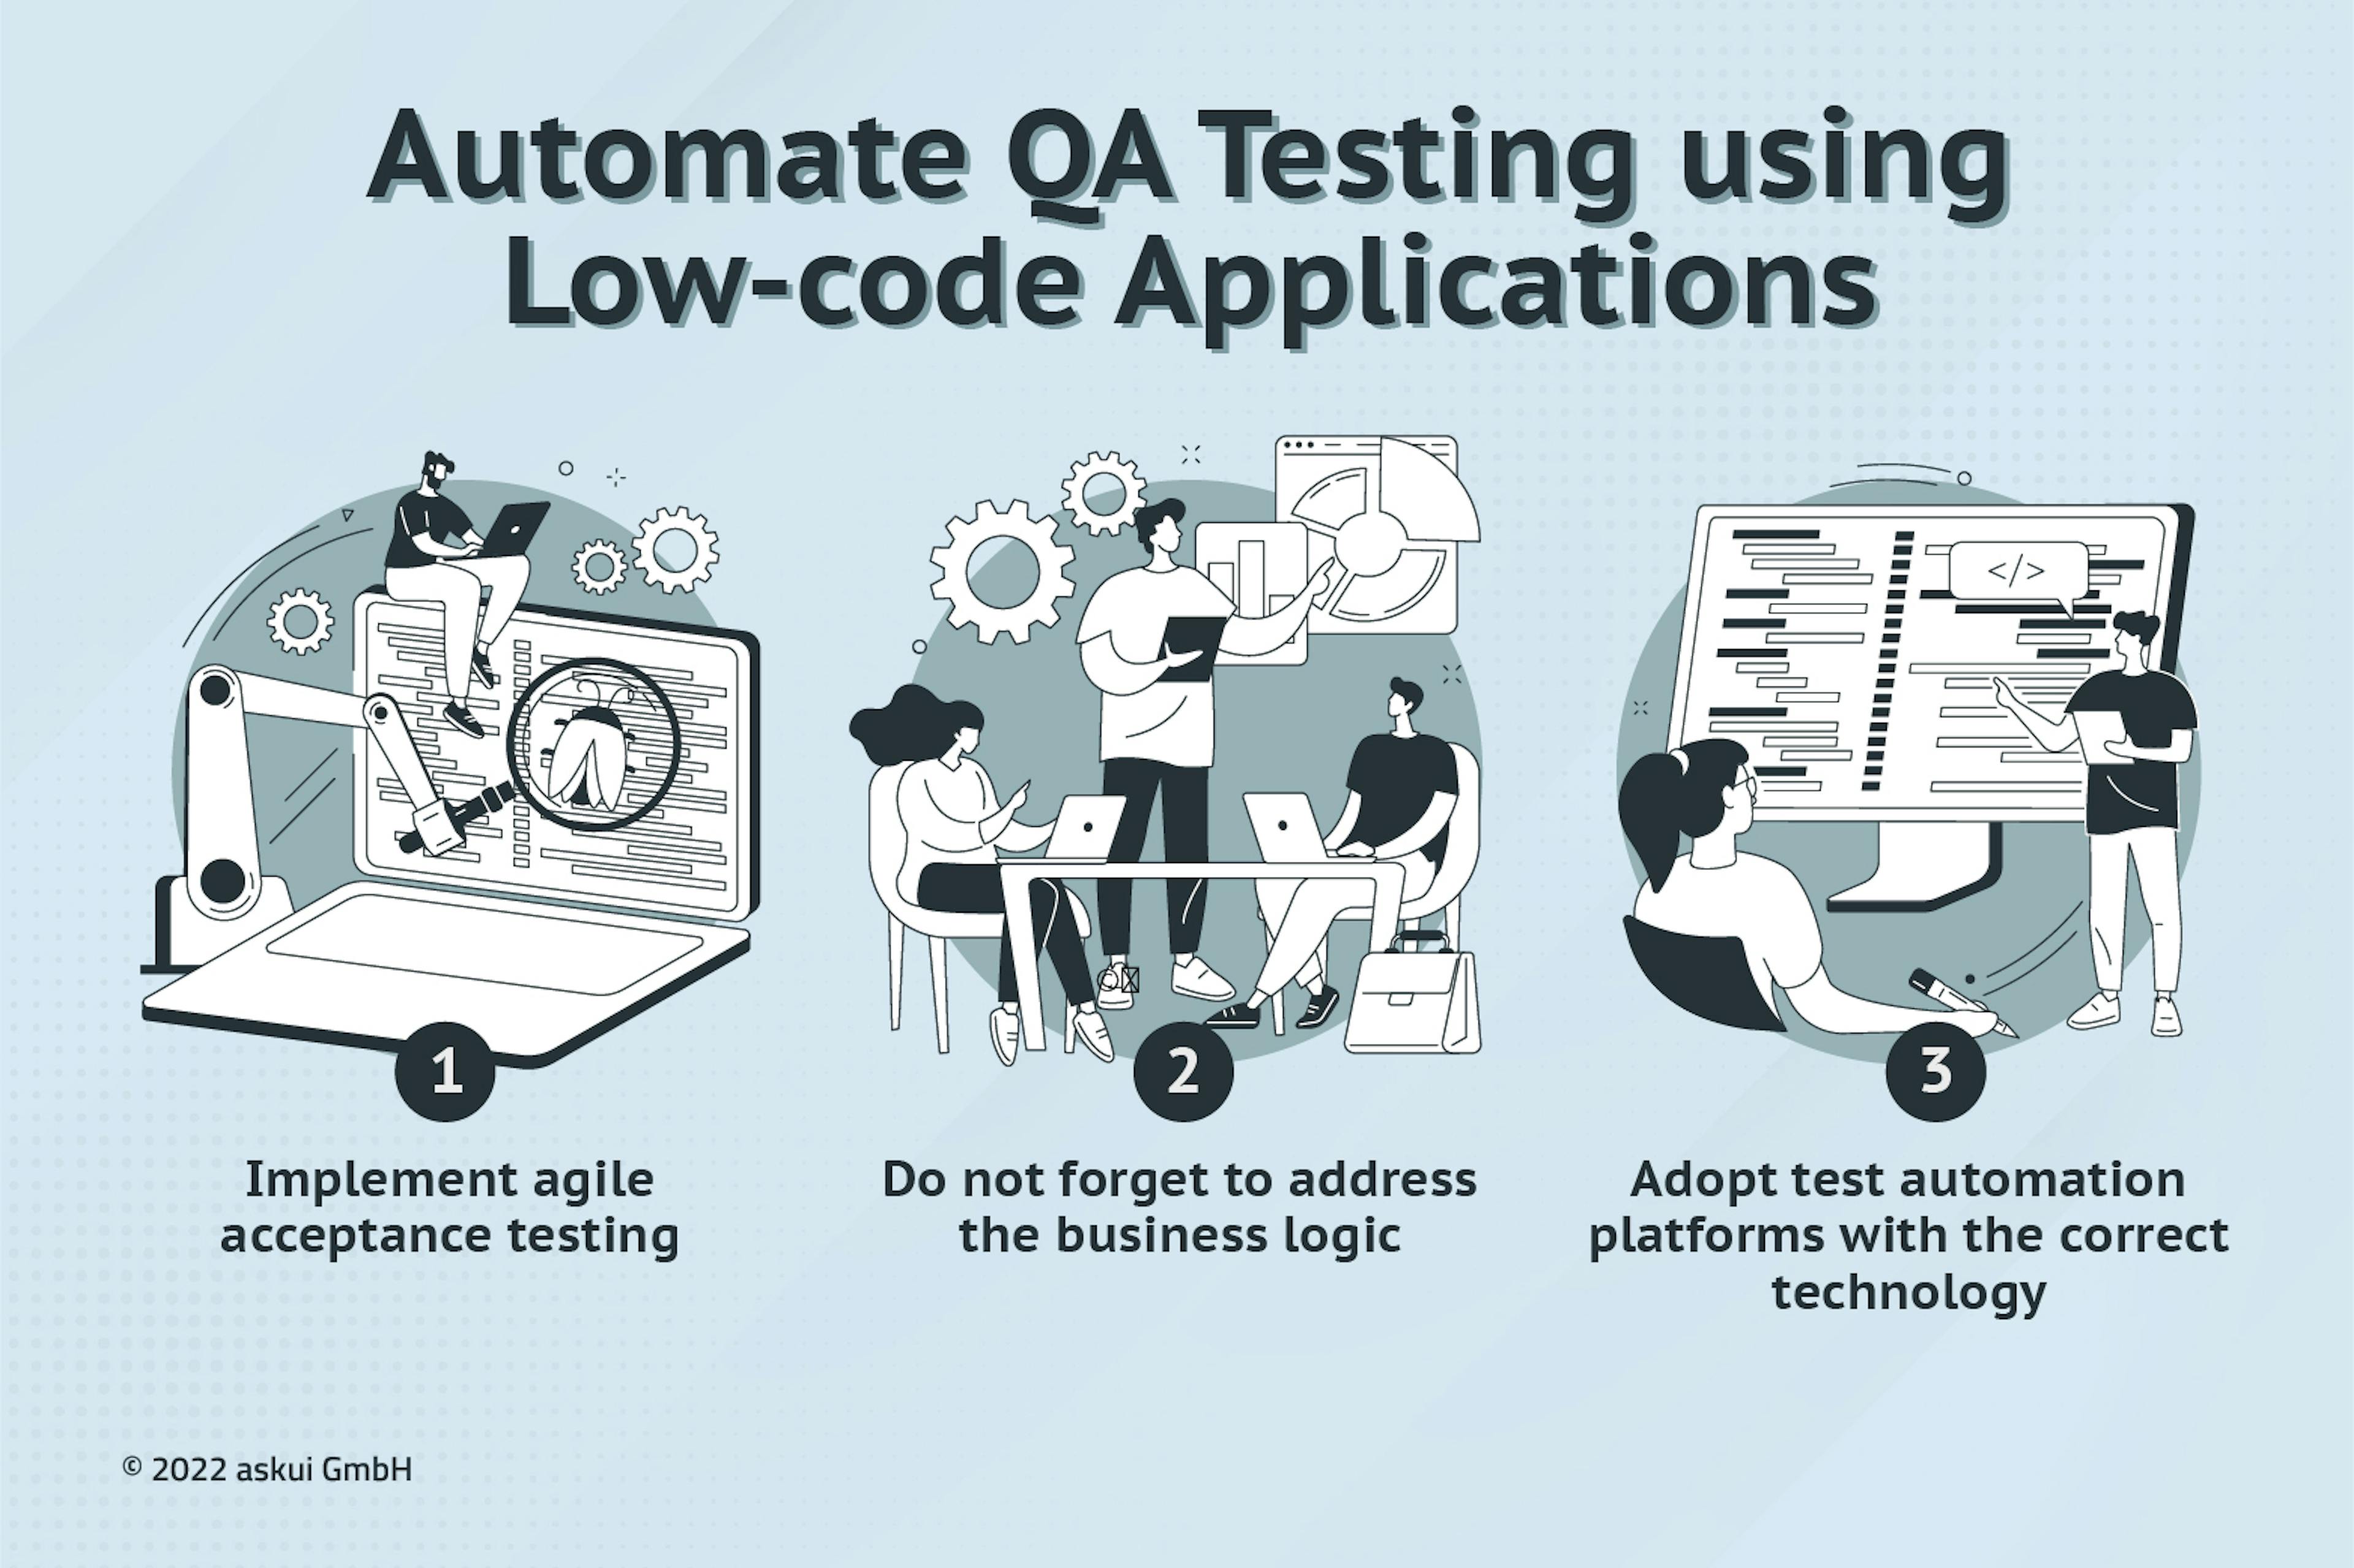 Automate QA Testing using Low-code Applications